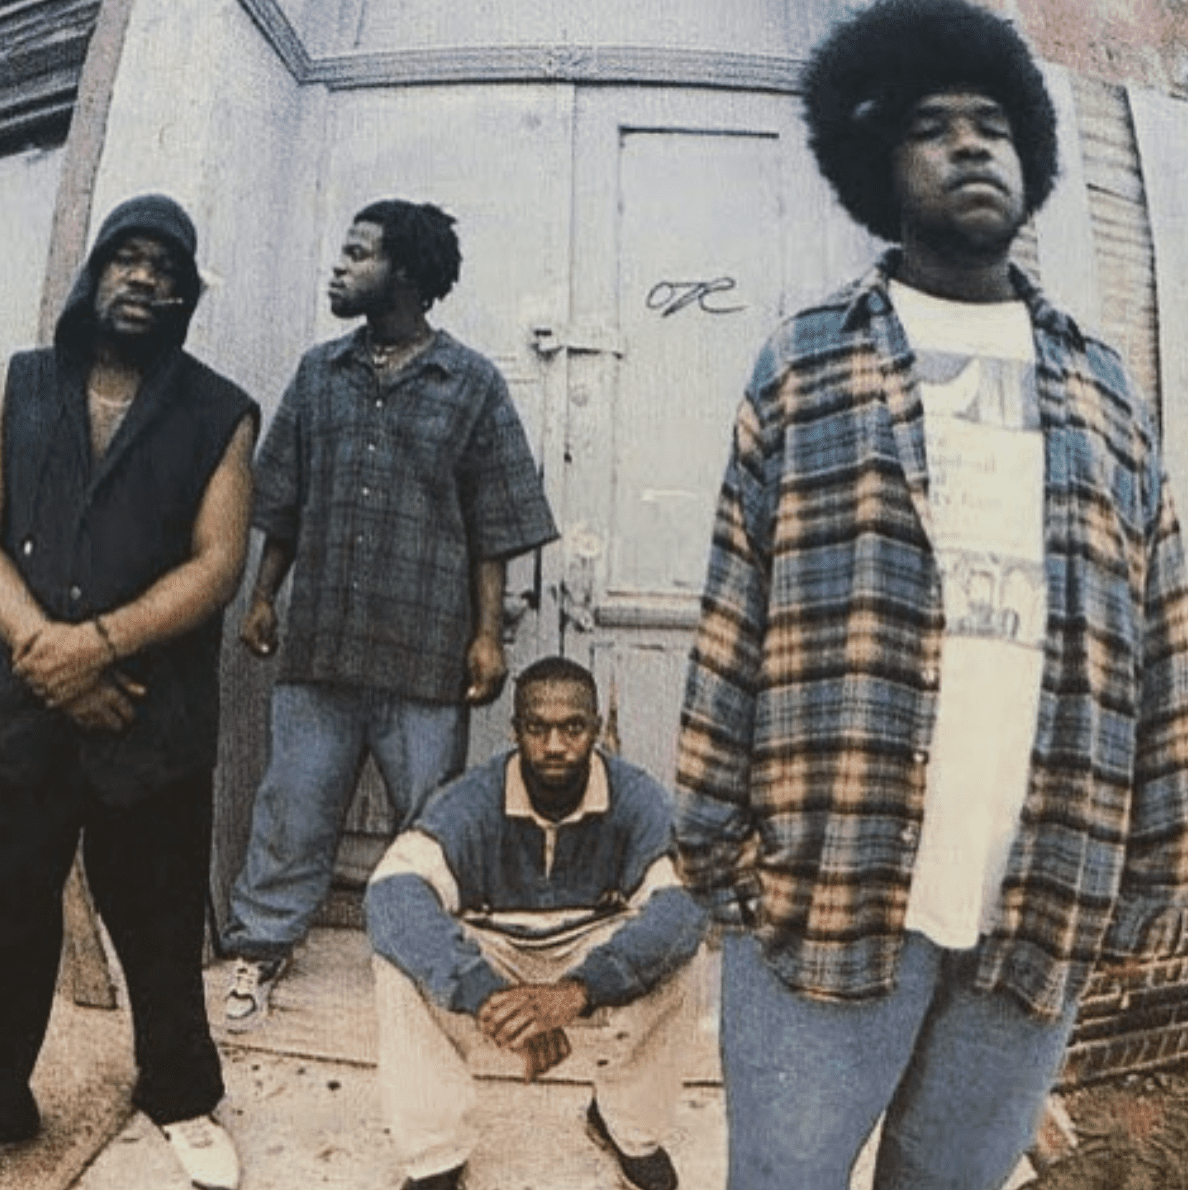 Members of The Roots, Questlove, Black Thought, and Malik B. stand outside a building | Source: instagram.com/questlove